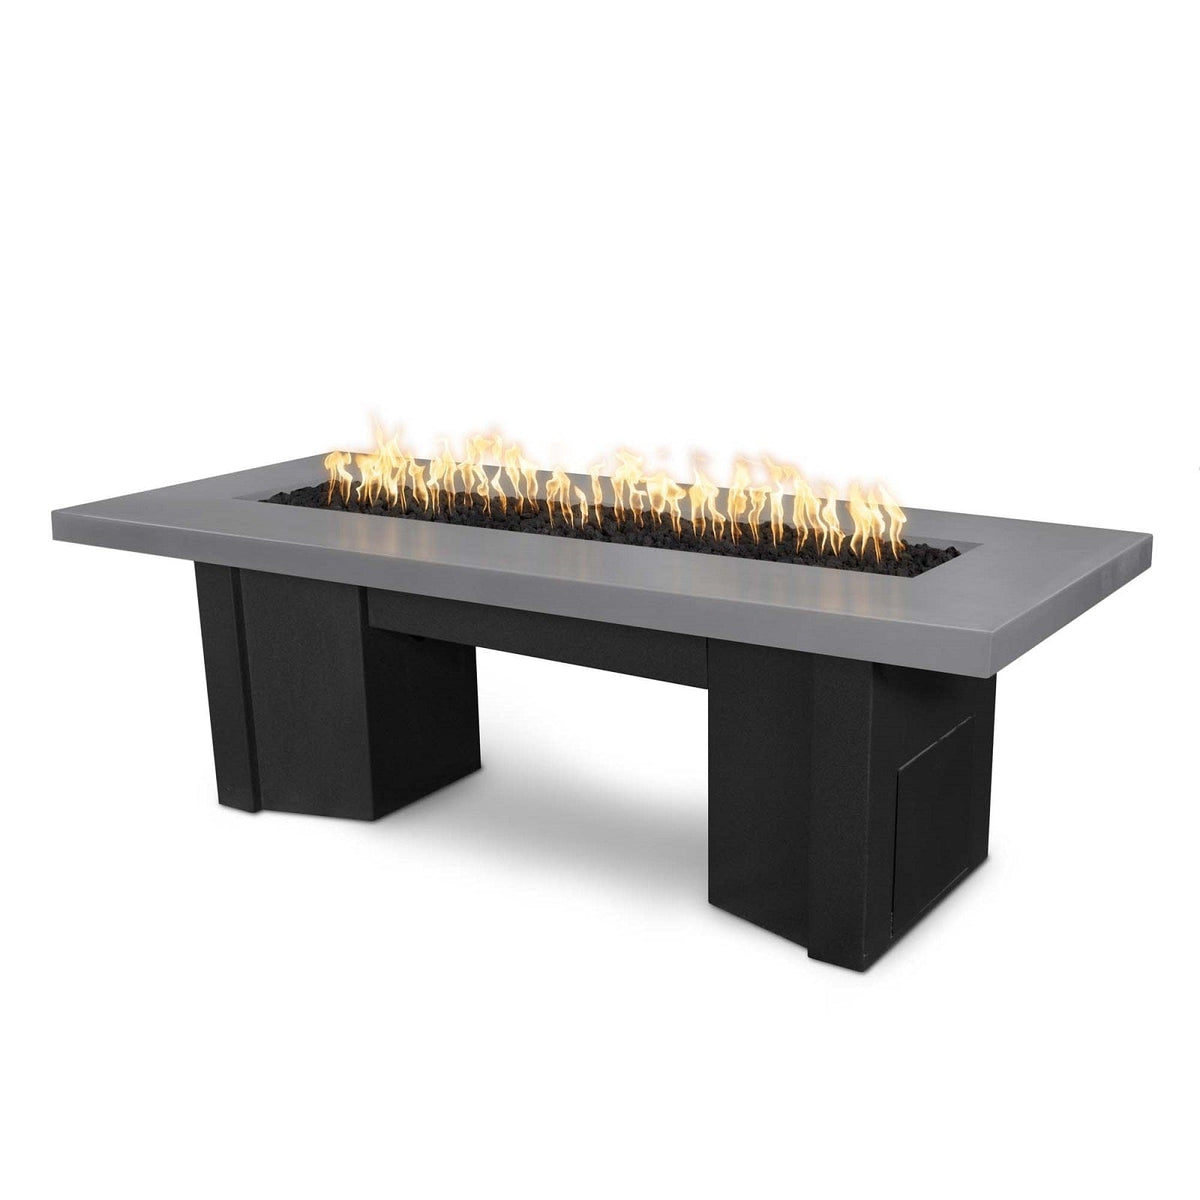 The Outdoor Plus Fire Features Natural Gray (-NGY) / Black Powder Coated Steel (-BLK) The Outdoor Plus 60&quot; Alameda Fire Table Smooth Concrete in Liquid Propane - Flame Sense System with Push Button Spark Igniter / OPT-ALMGFRC60FSEN-LP